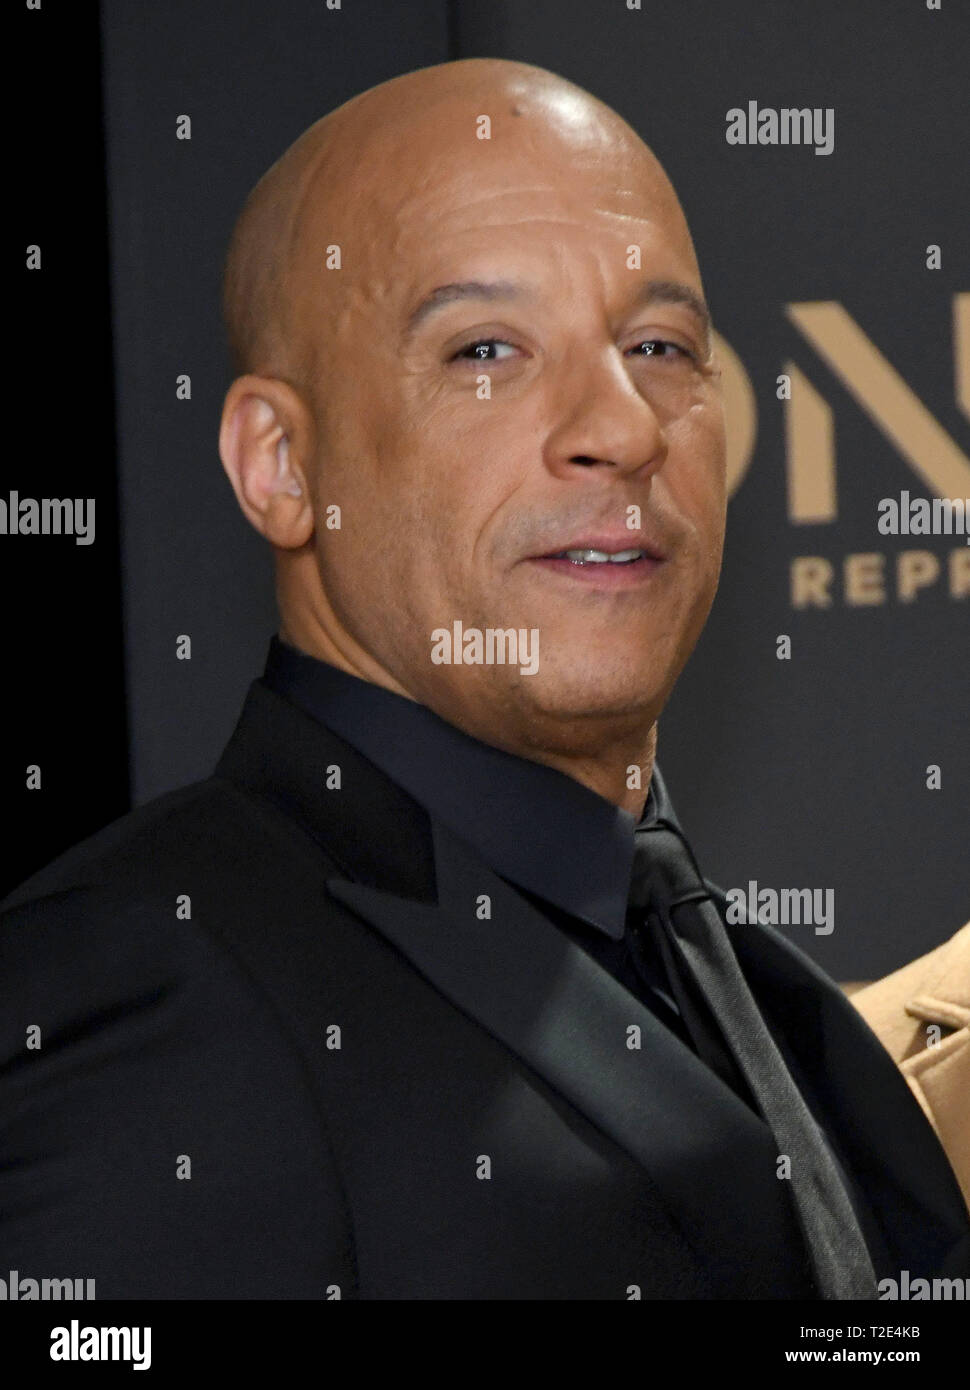 March 30, 2019 - Hollywood, California, U.S. - 30 March 2019 - Hollywood, California - Vin Diesel. 2019 NAACP Image Awards - Press Room held at Dolby Theater. Photo Credit: Birdie Thompson/AdMedia (Credit Image: © Birdie Thompson/AdMedia via ZUMA Wire) Stock Photo